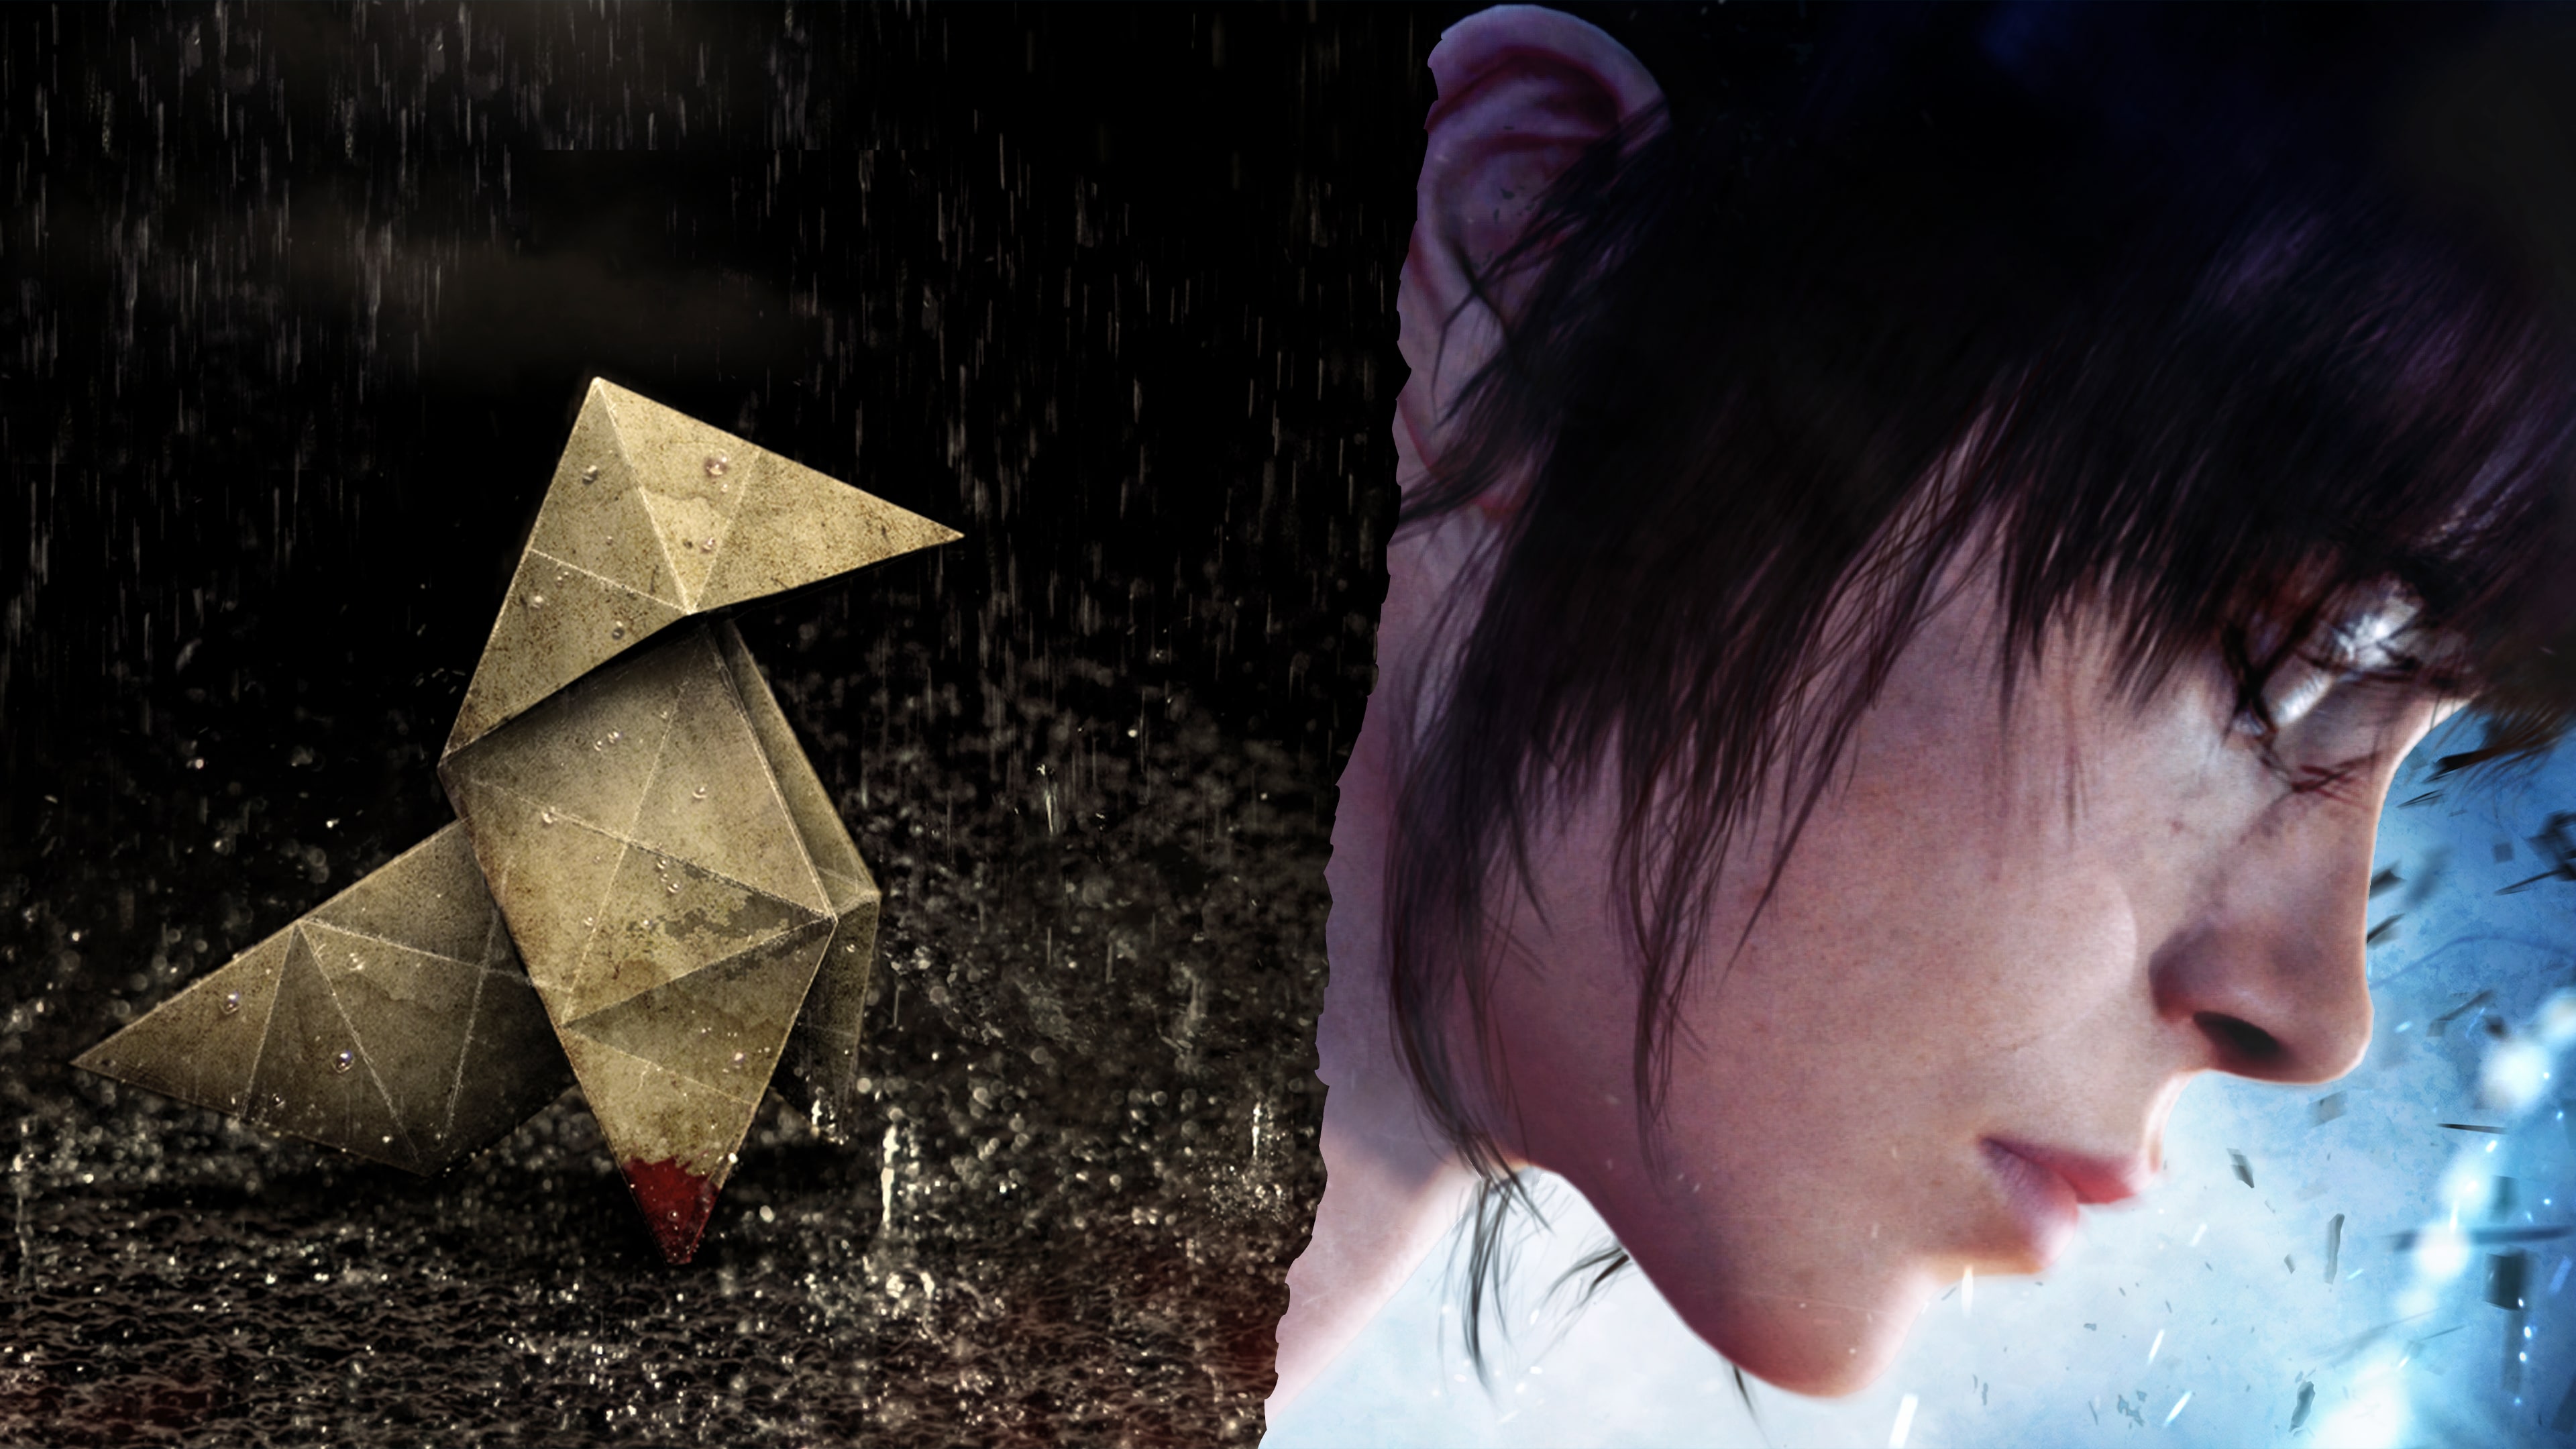 The Heavy Rain™ & BEYOND: Two Souls™ Collection